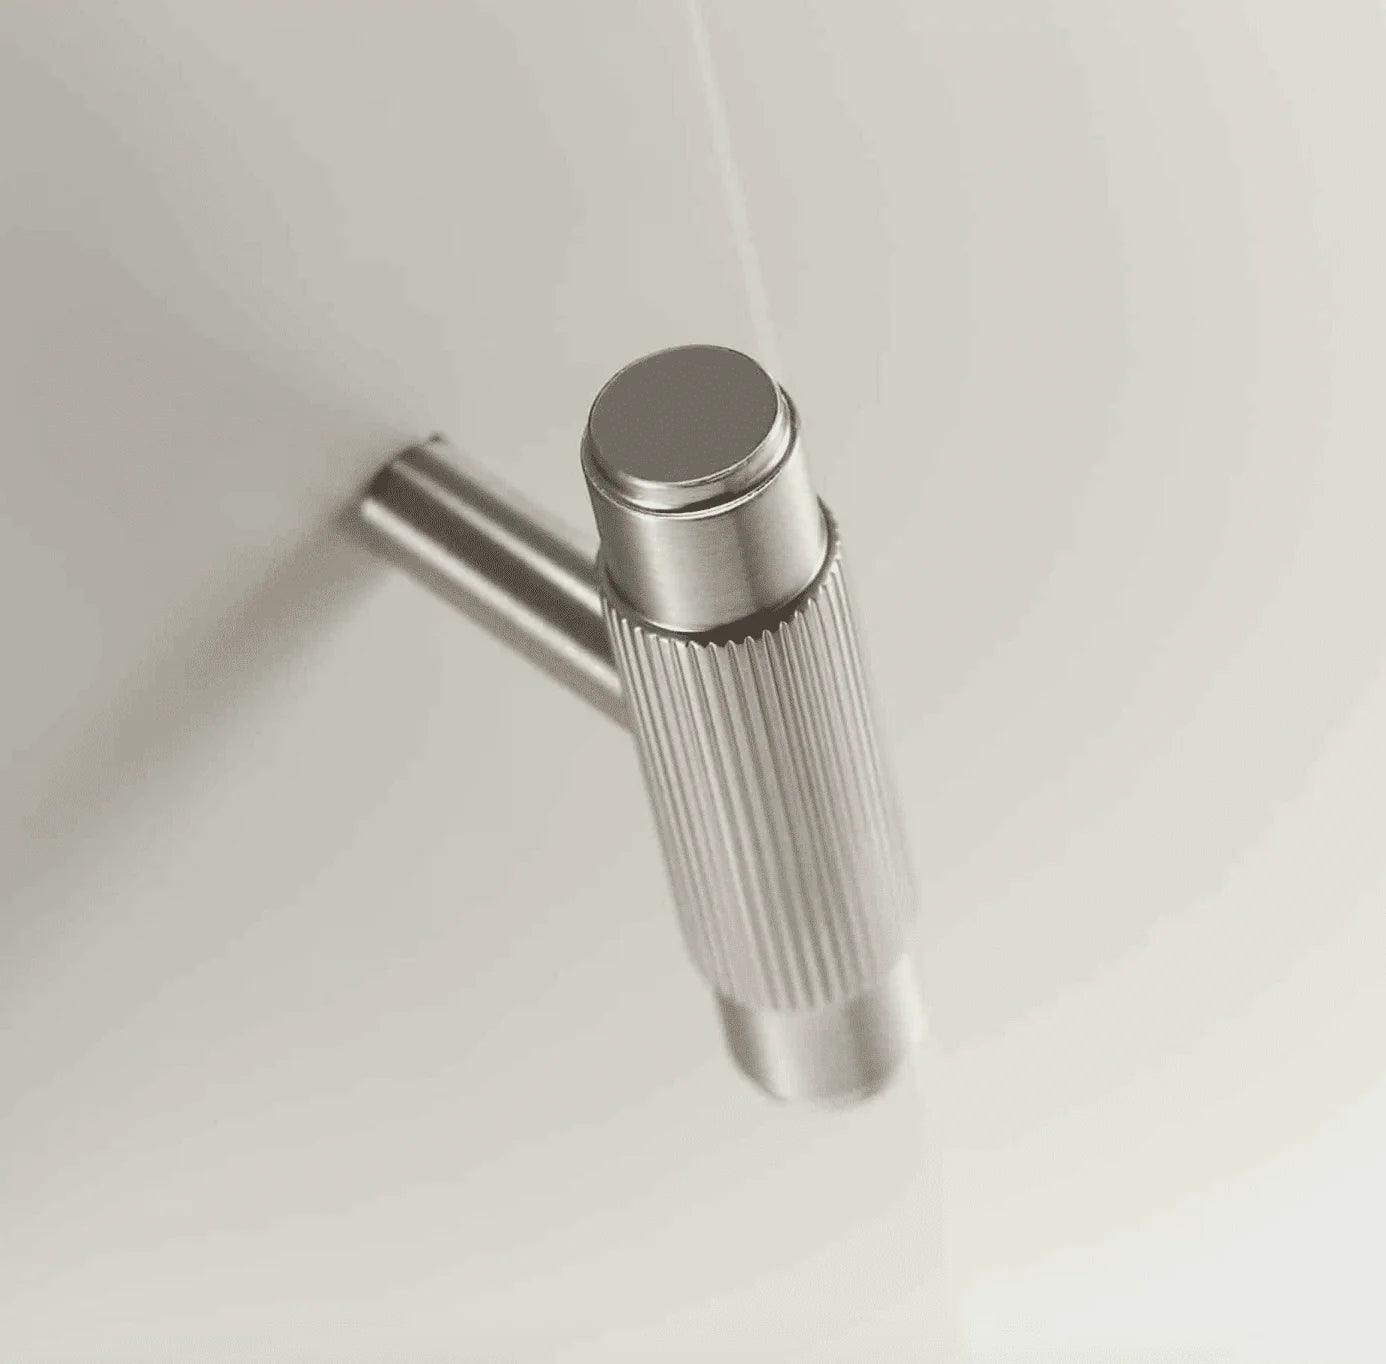 MARBELLA / SOLID BRASS KNURLED T-BAR - Handle Shop Couture 